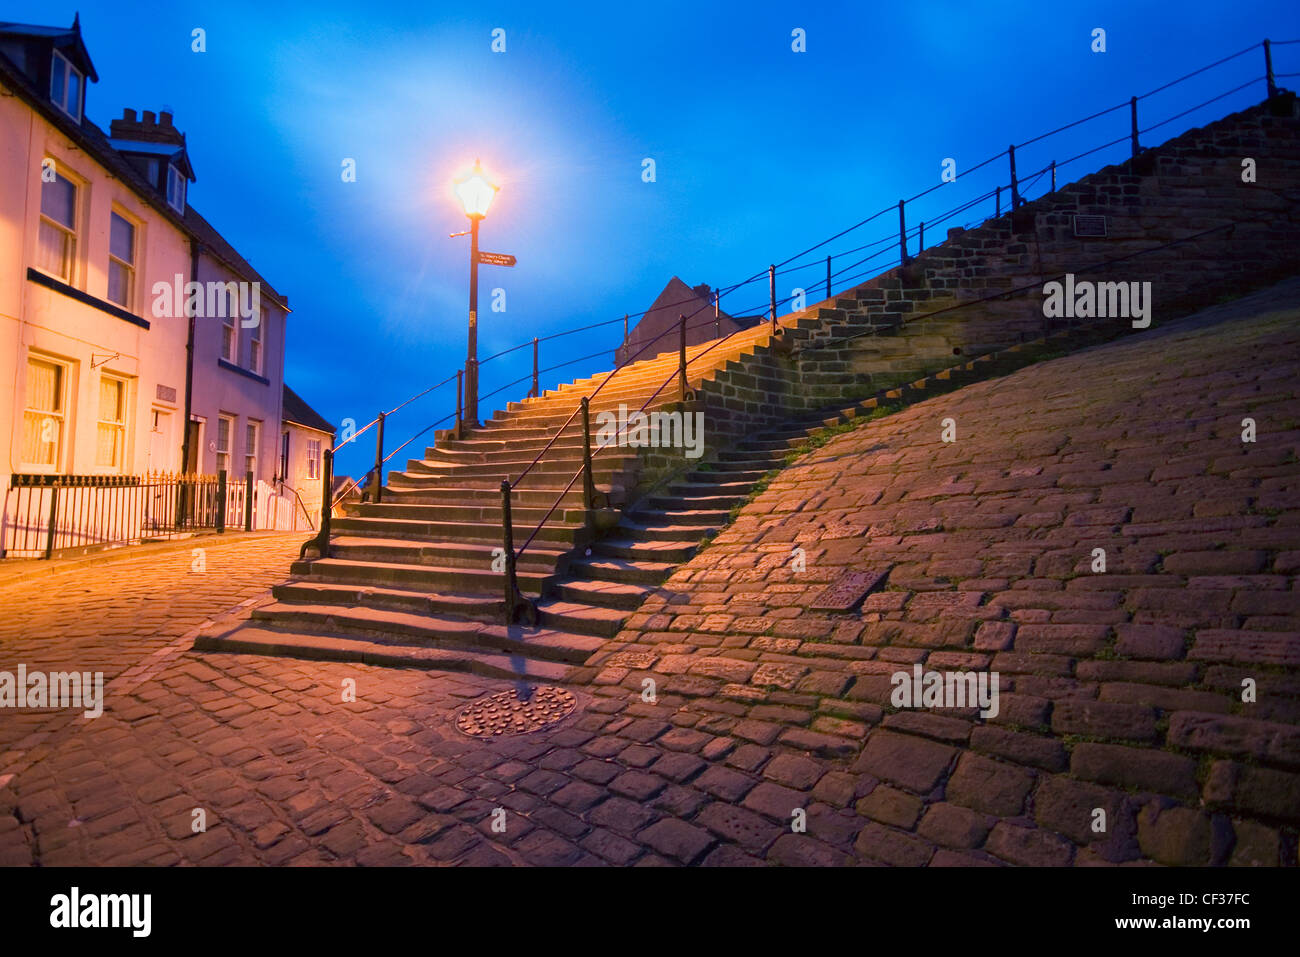 The base of the famous 199 steps leading in the old town of Whitby illuminated by a traditional street light. Stock Photo